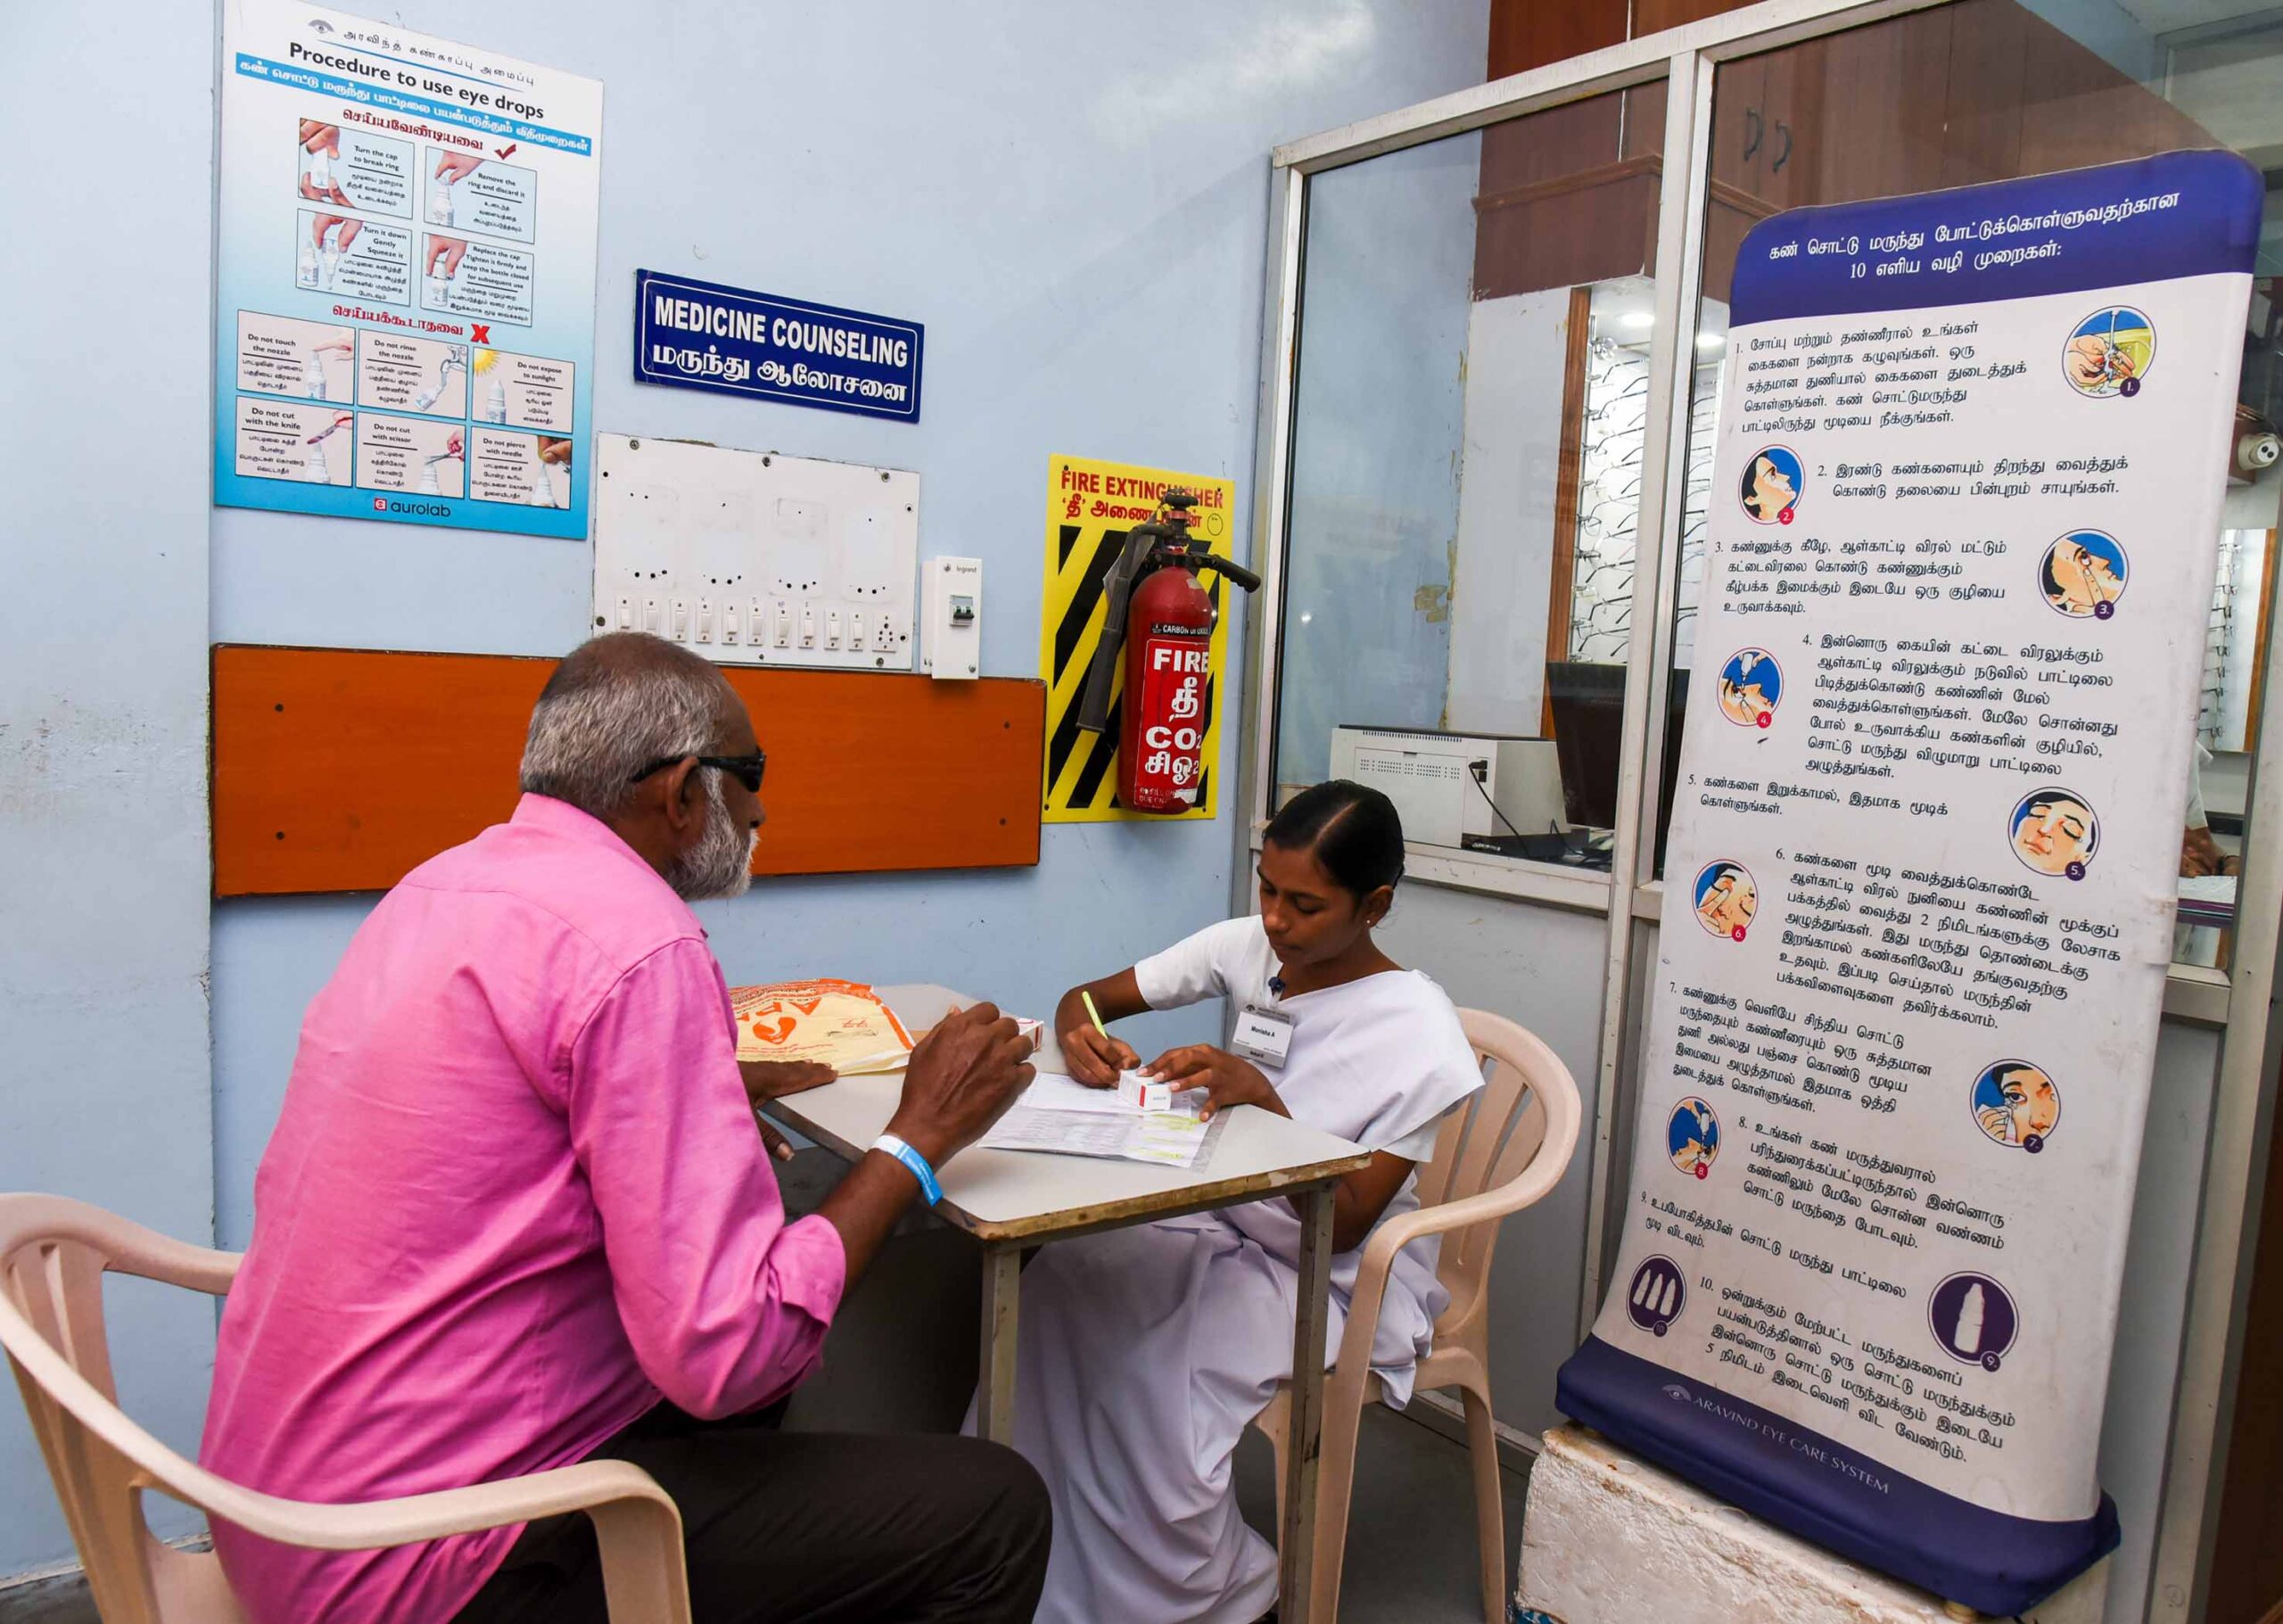 A pharmacy assistant counsels a patient about his eye medicines and how to use them. INDIA